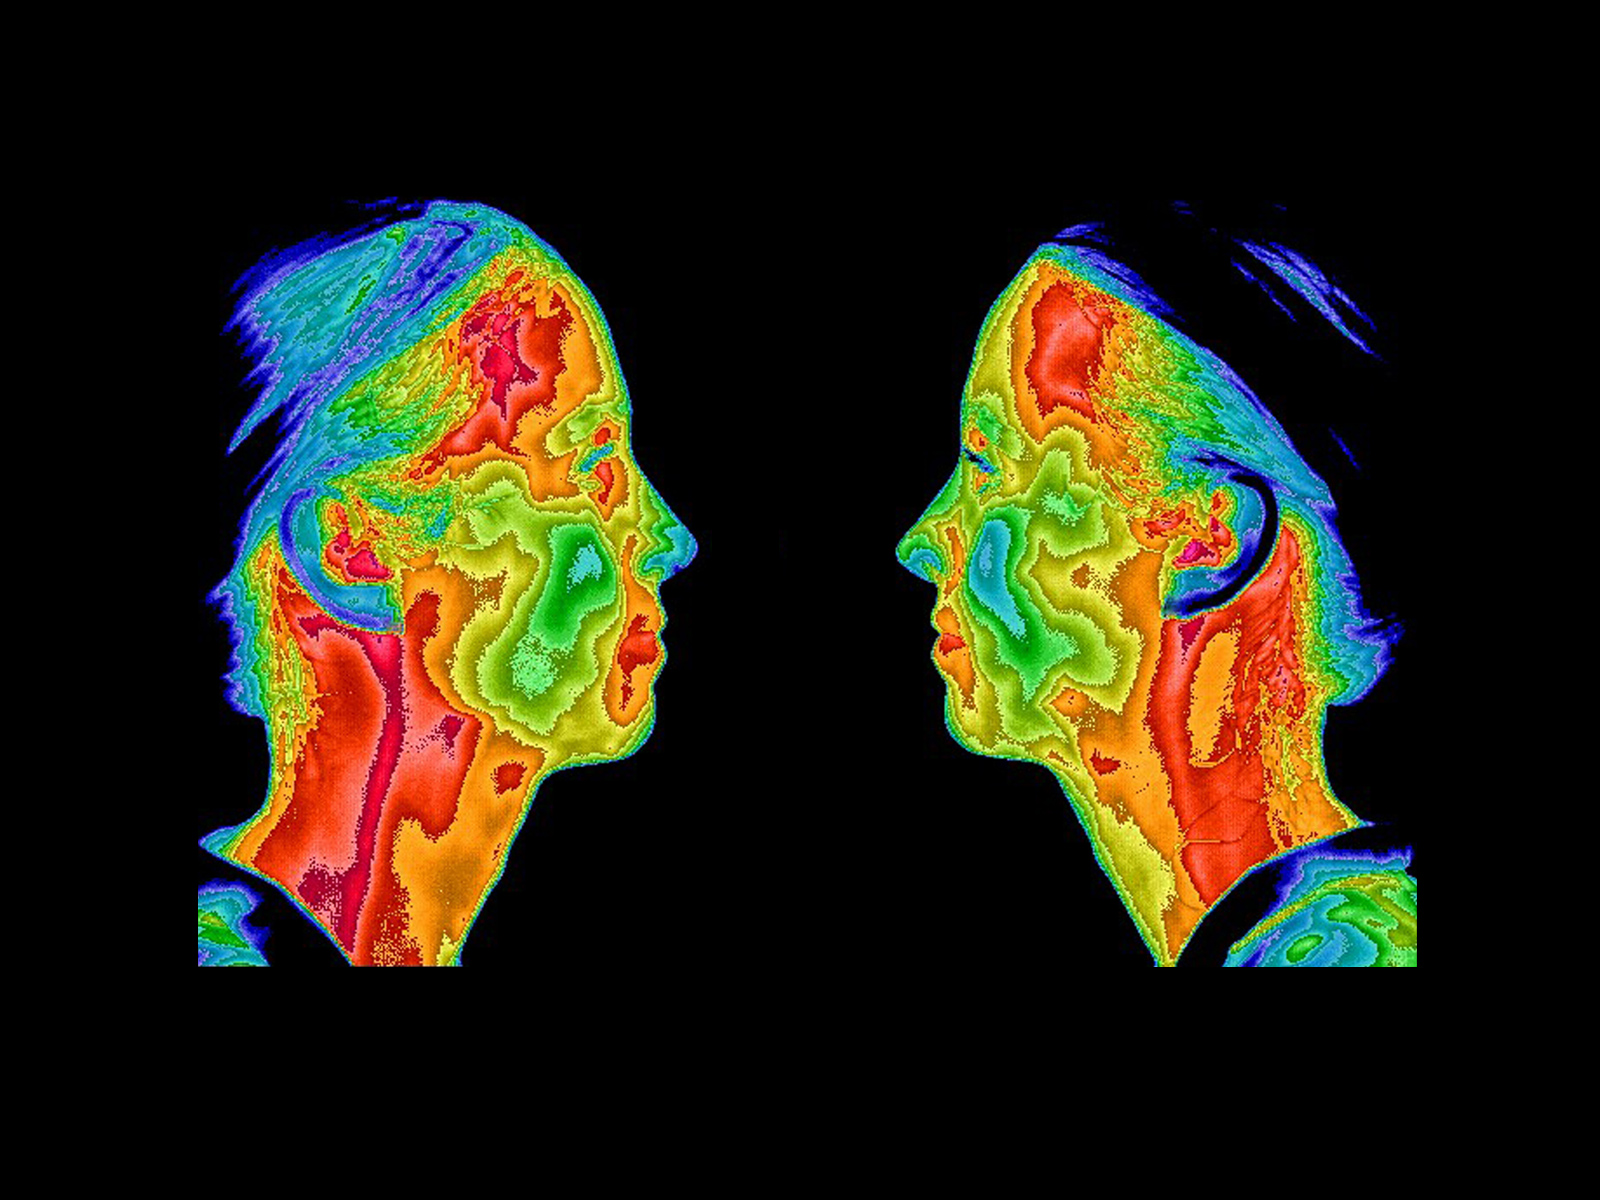 Thermogram of faces